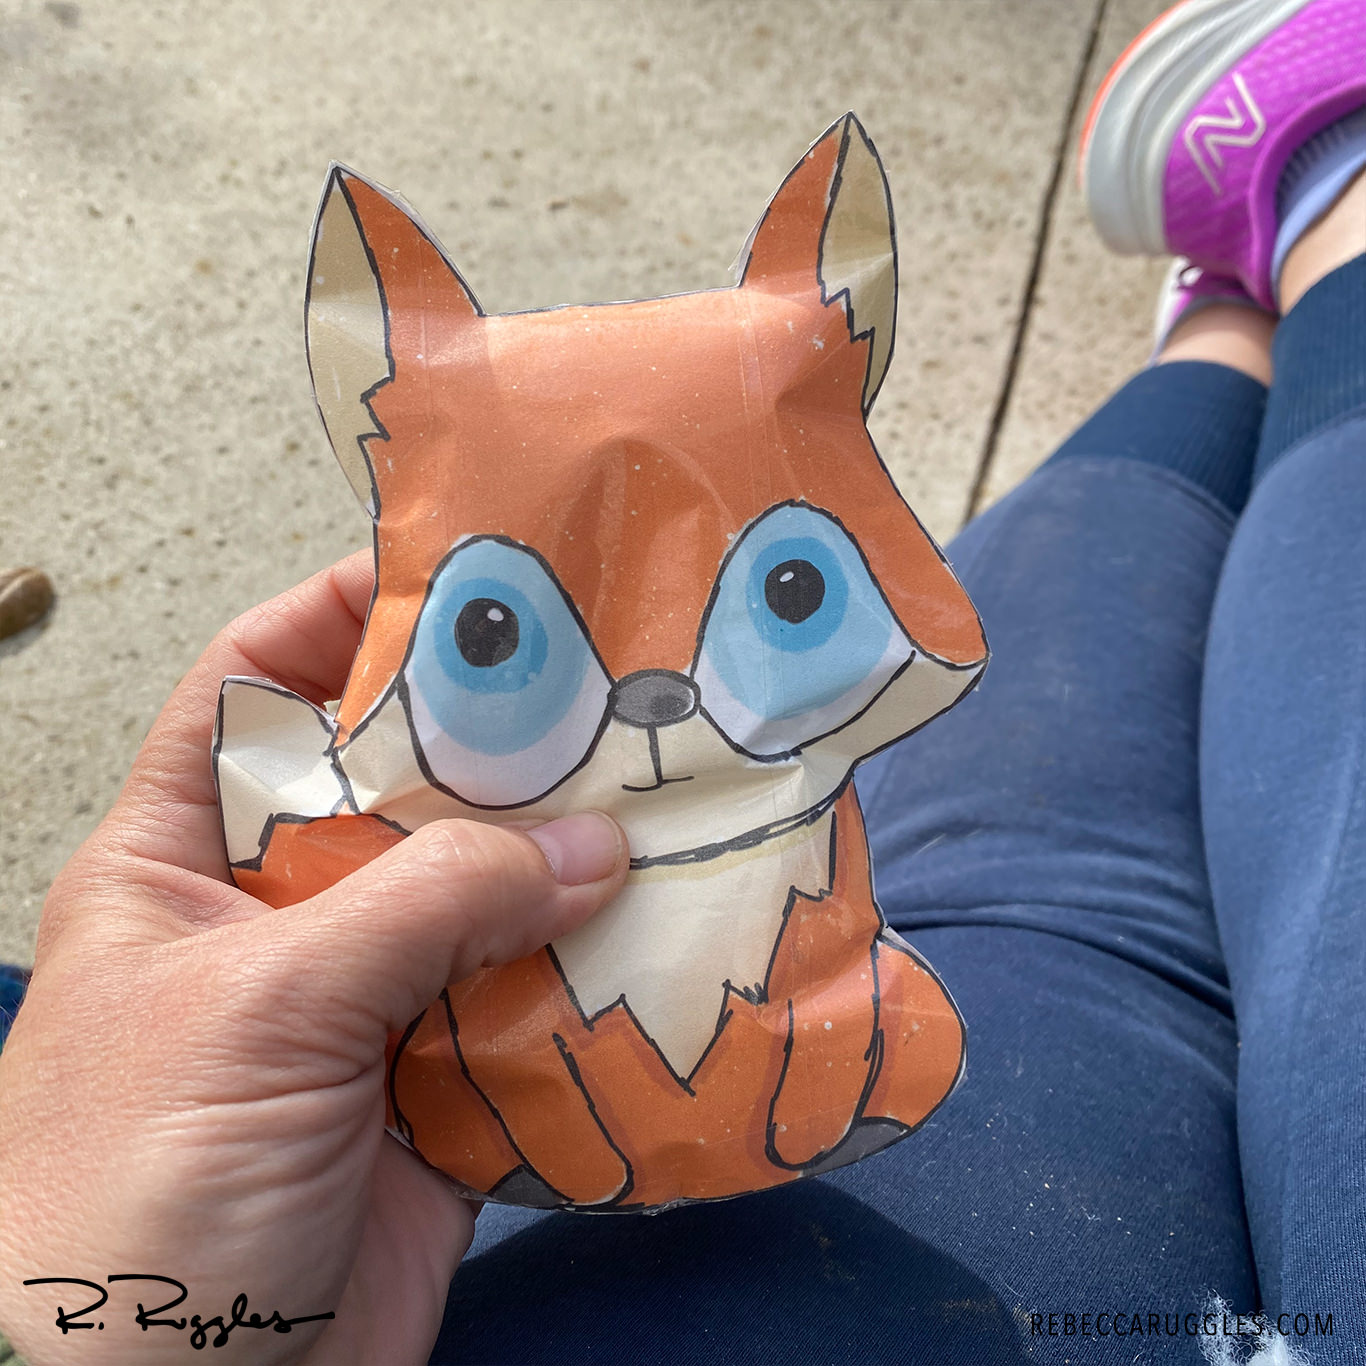 Paper squishy fox design test. Packing tape and paper stuffed animal.